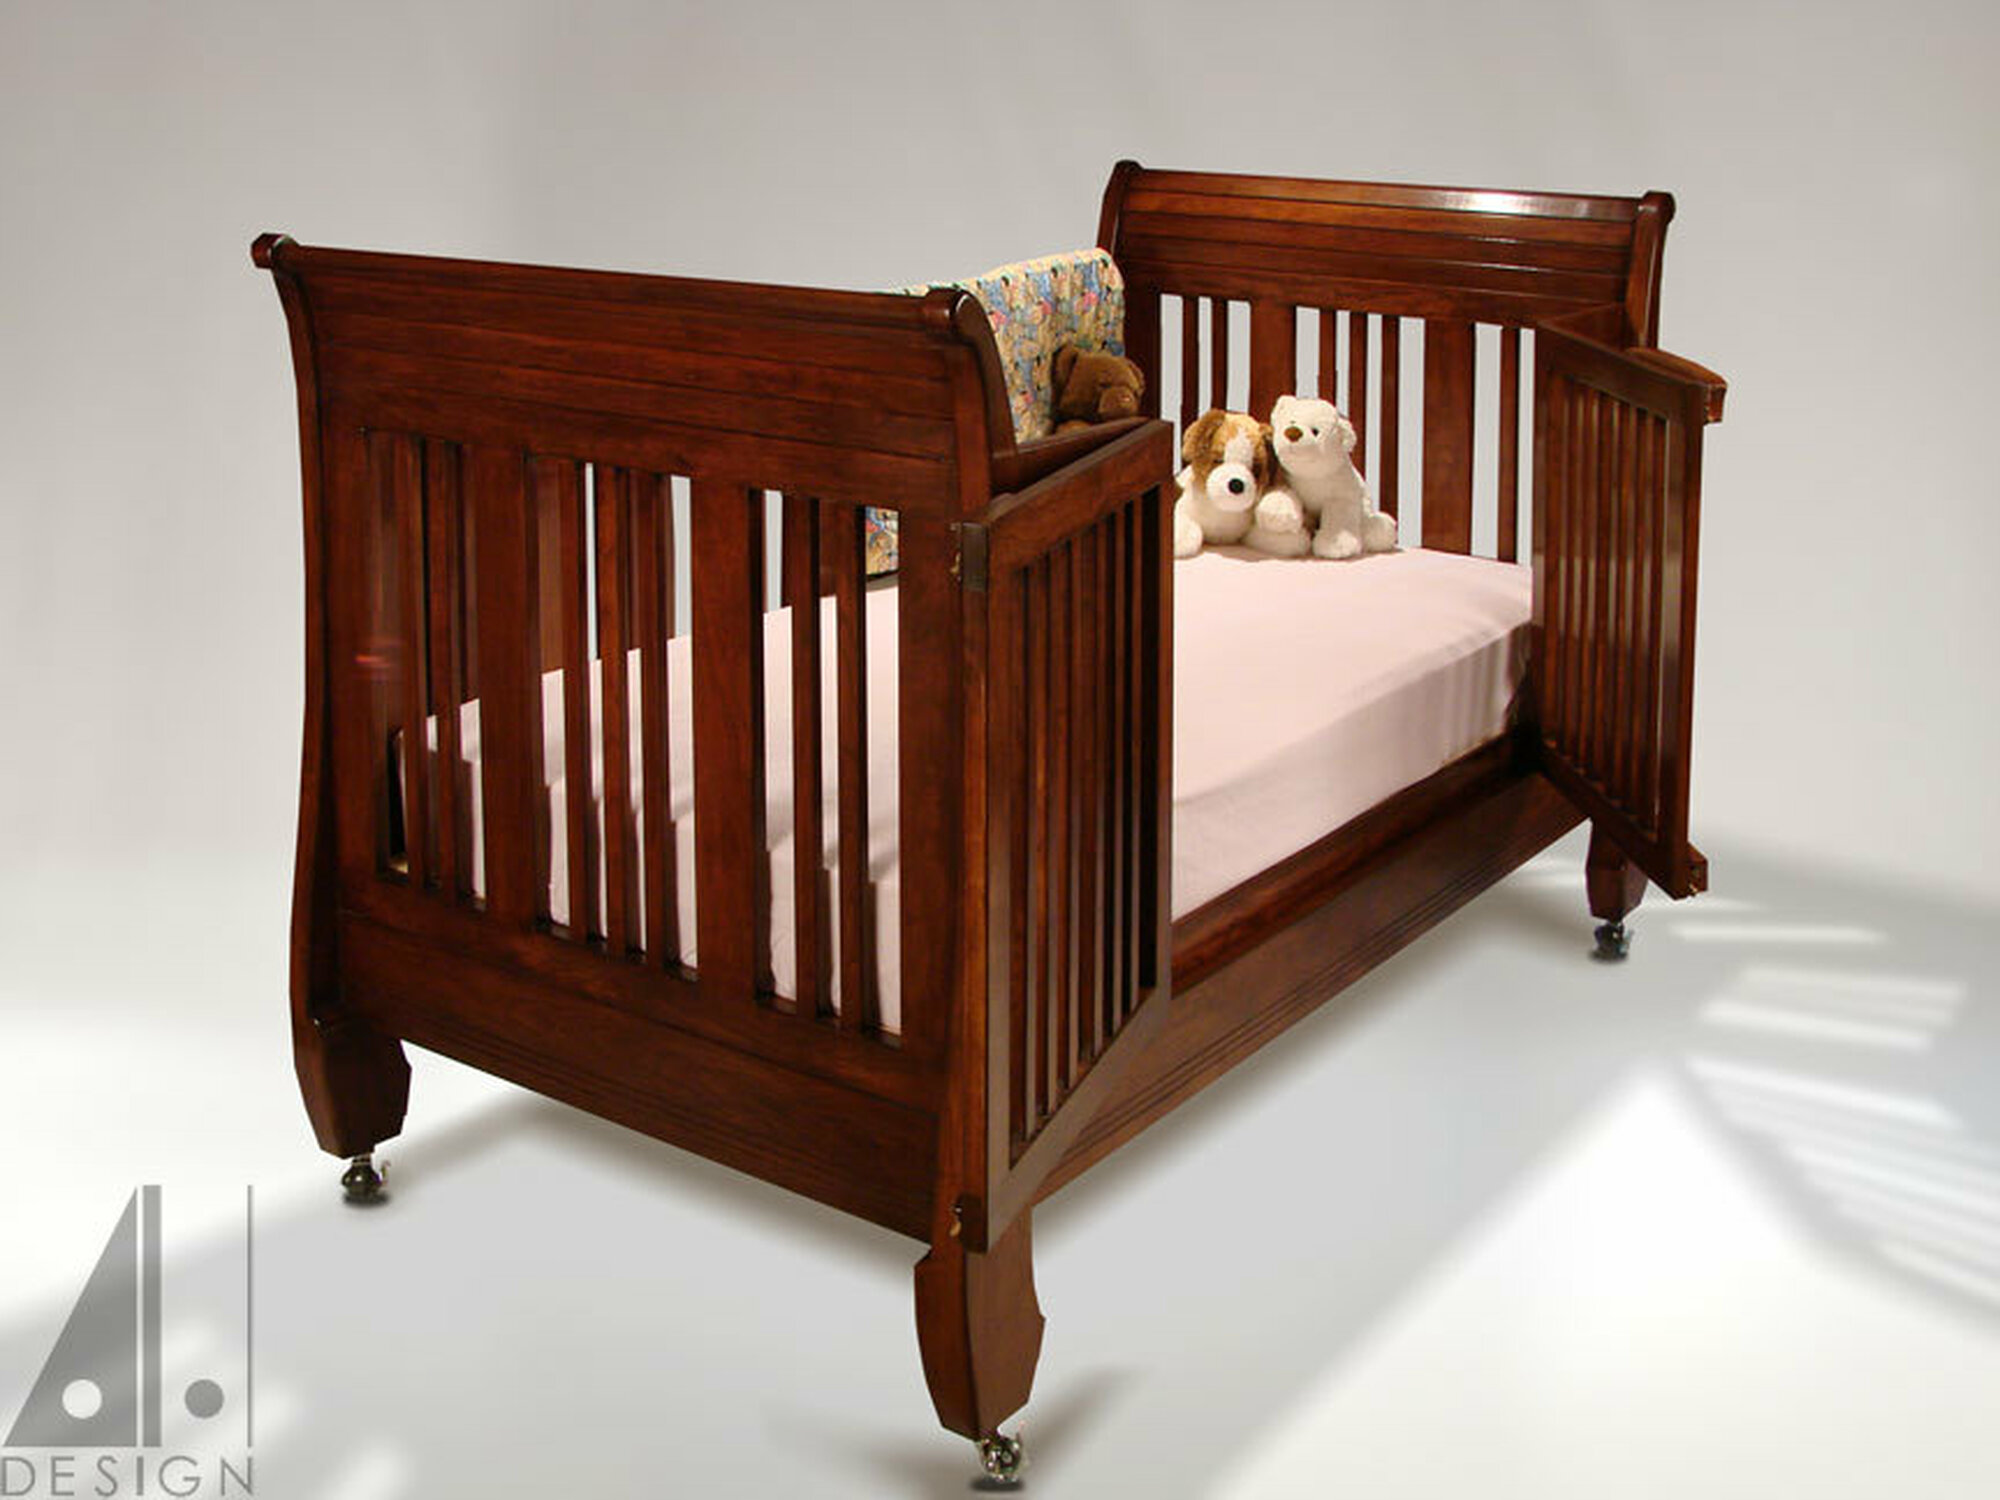 Transformable bed/crib